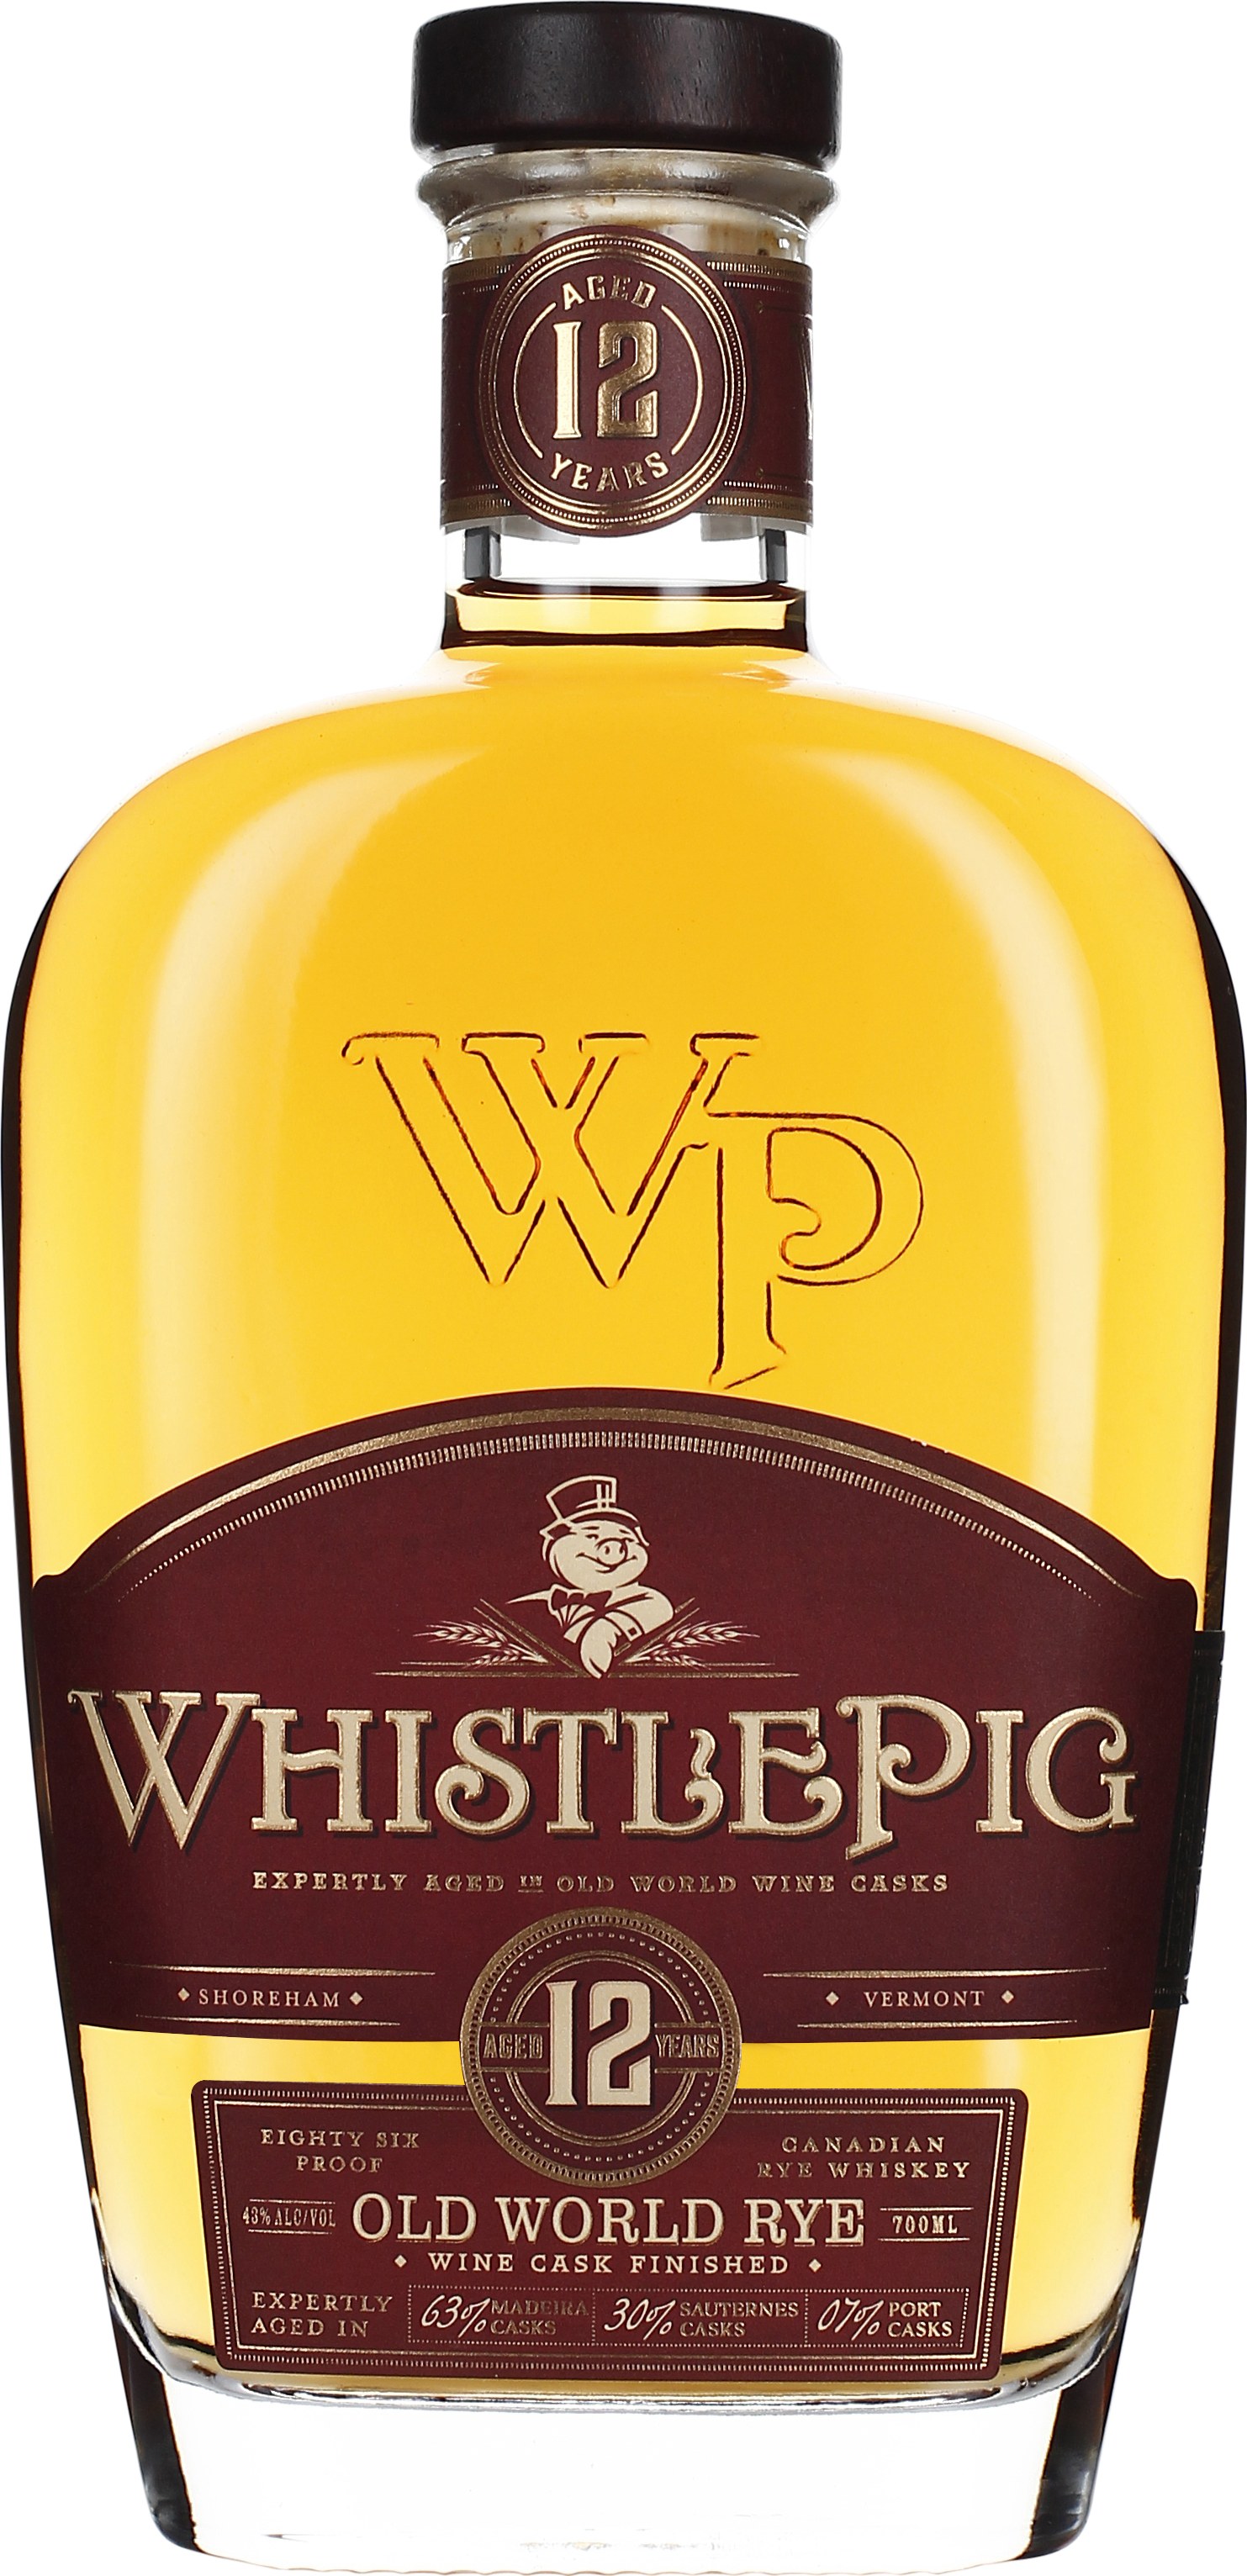 Drankdozijn WhistlePig 12 years Old World Rye 70CL aanbieding